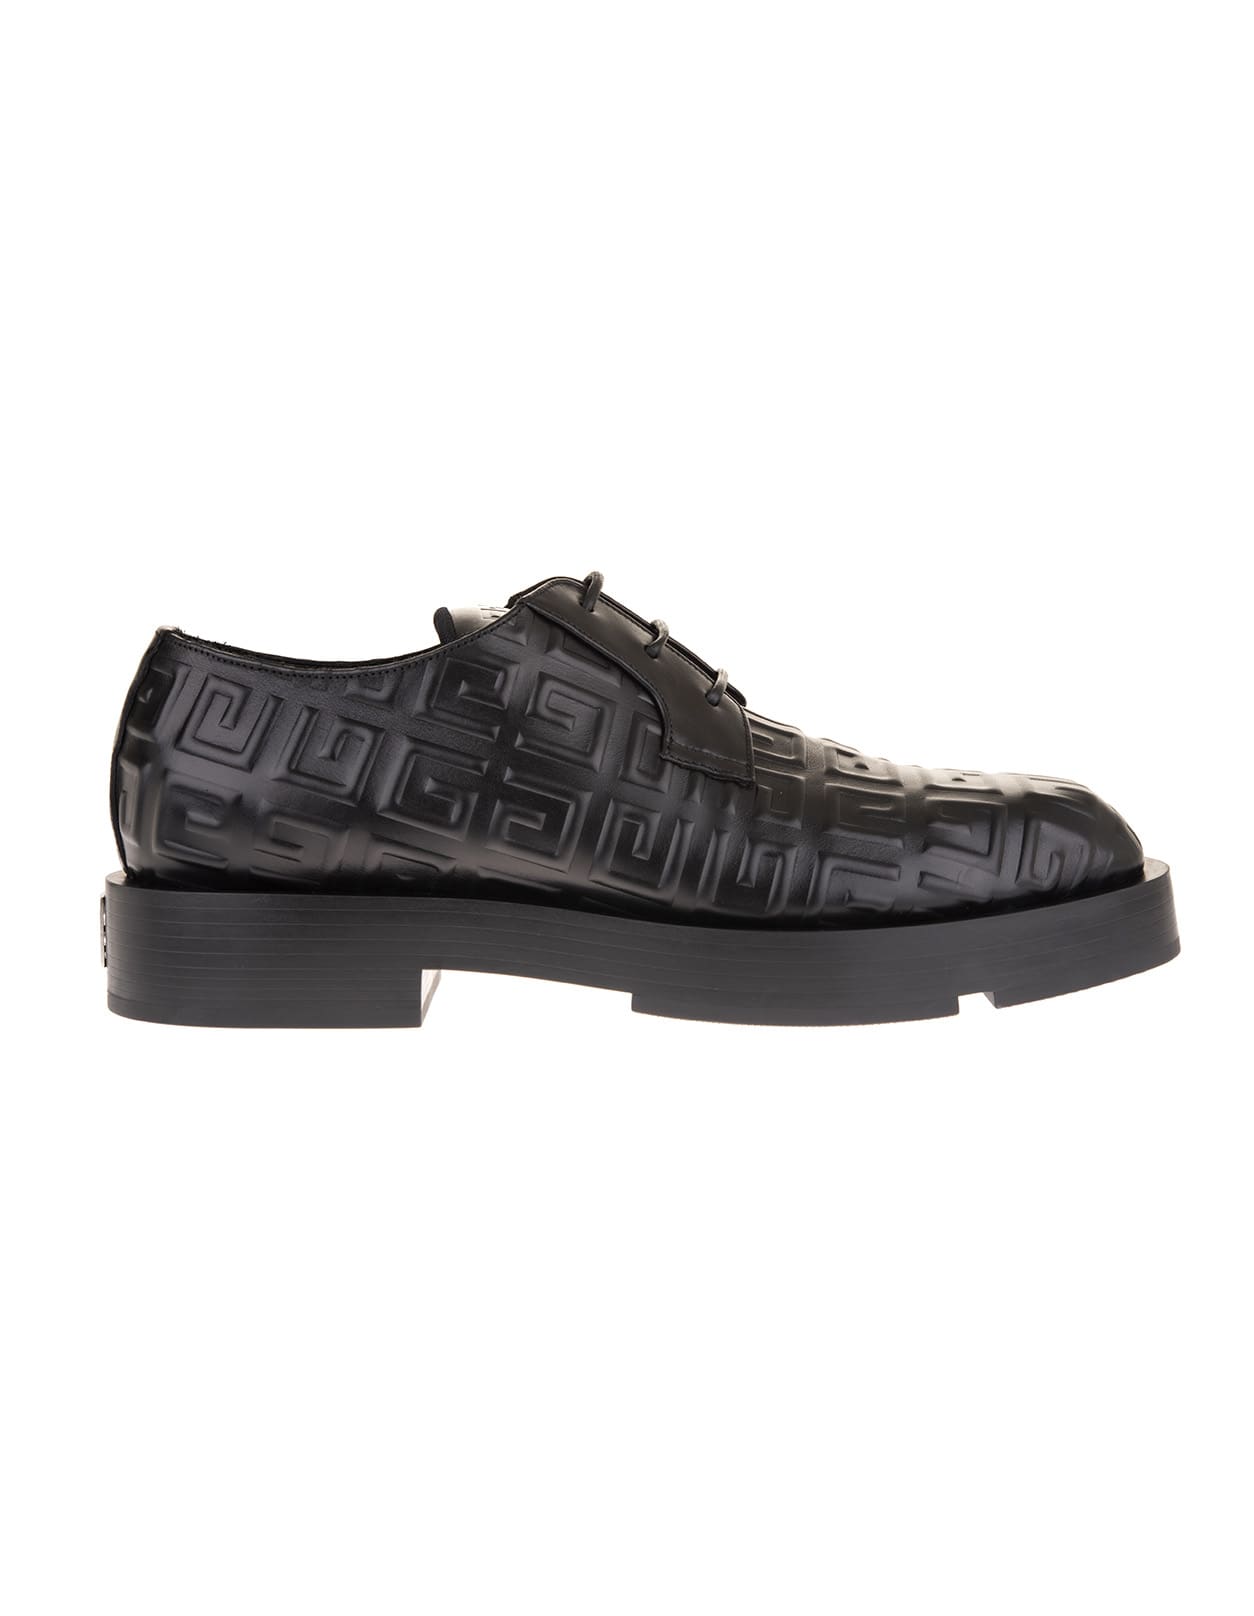 Givenchy Man Squared Derby Shoe In Black 4g Leather